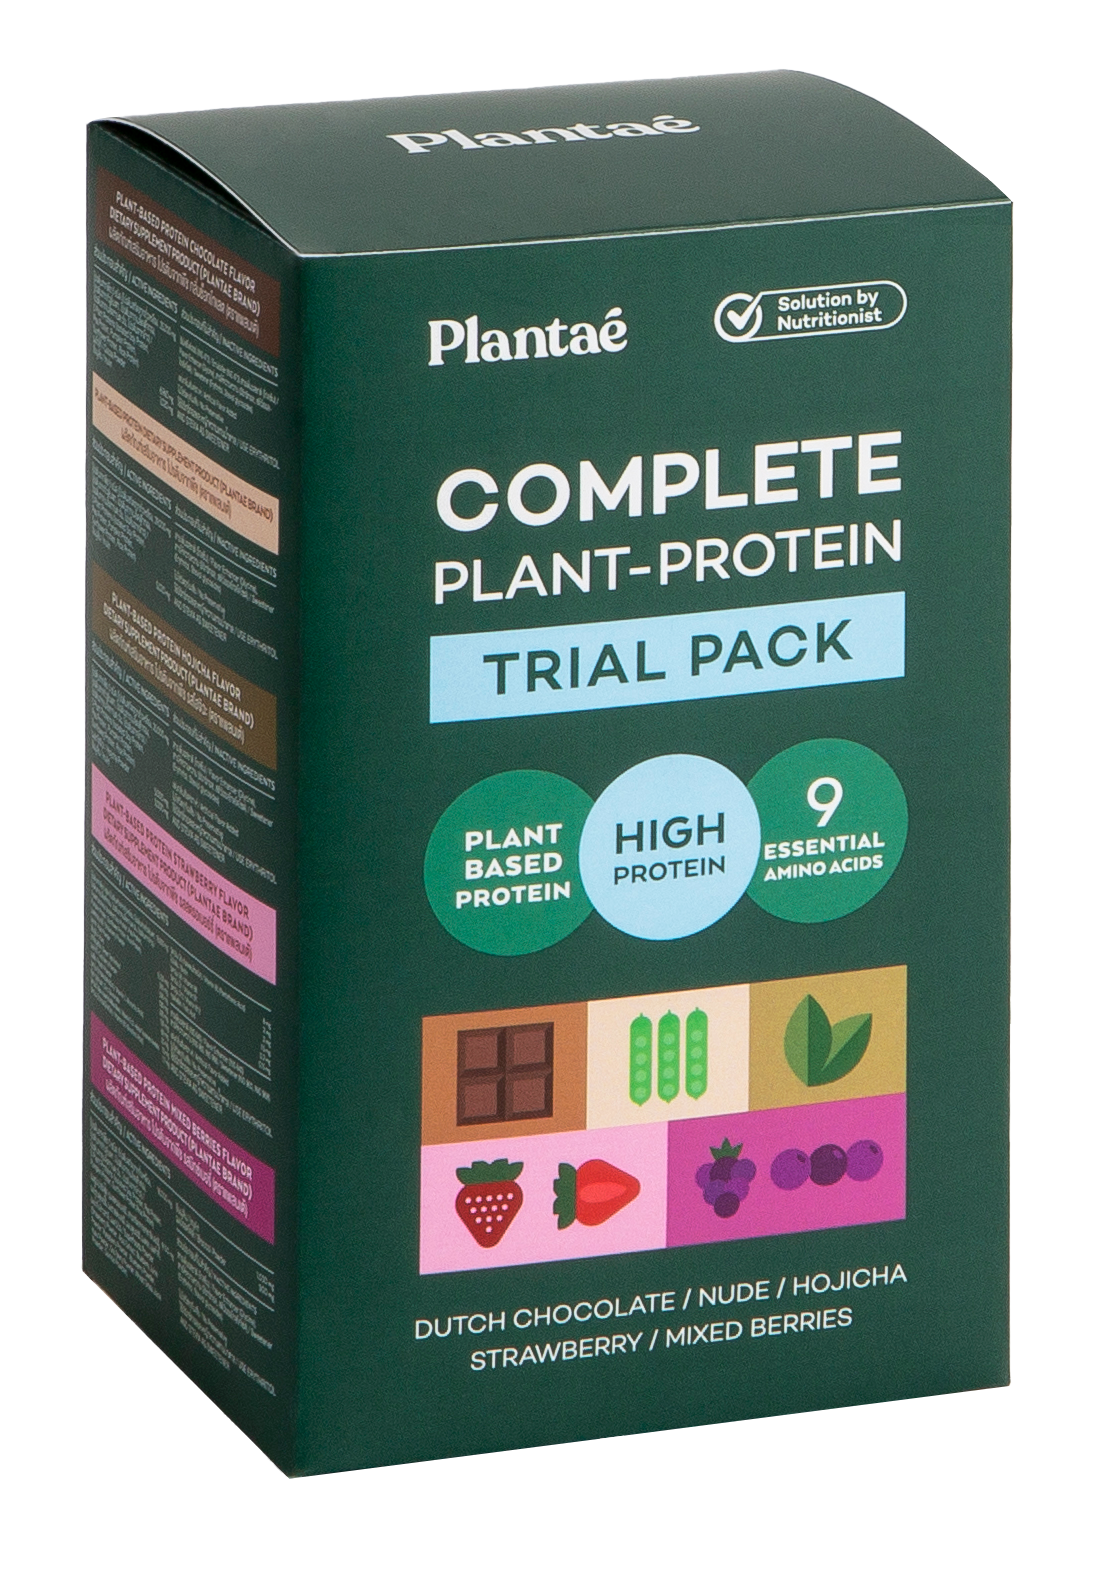 Plantae Special Edition Trial Pack: 5 Sachets